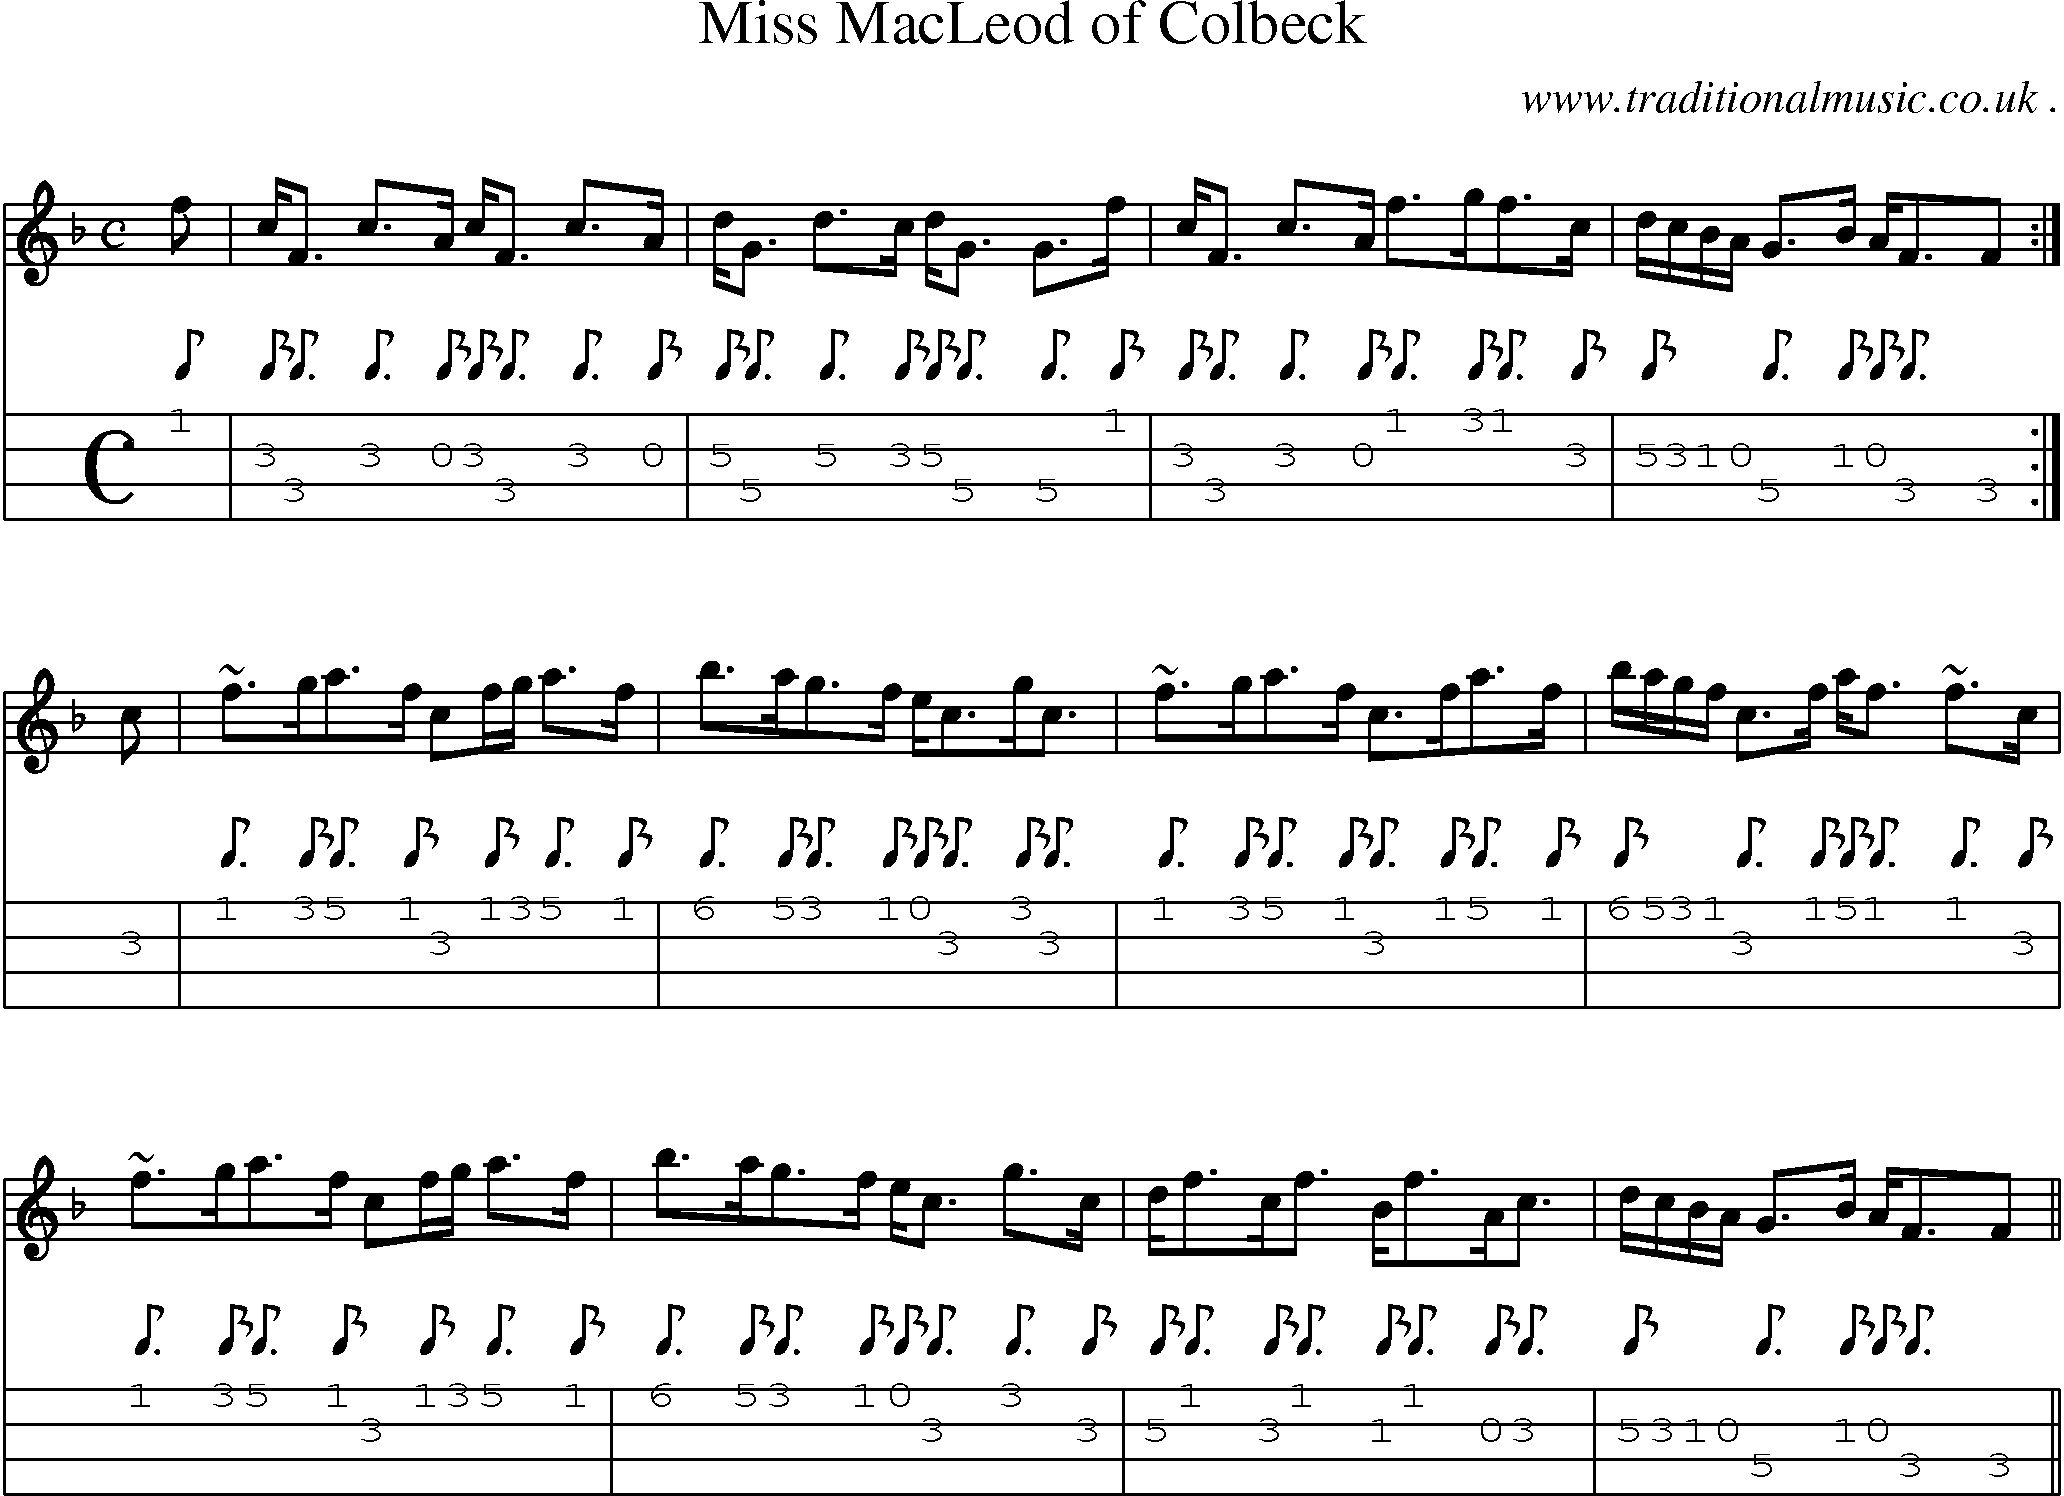 Sheet-music  score, Chords and Mandolin Tabs for Miss Macleod Of Colbeck